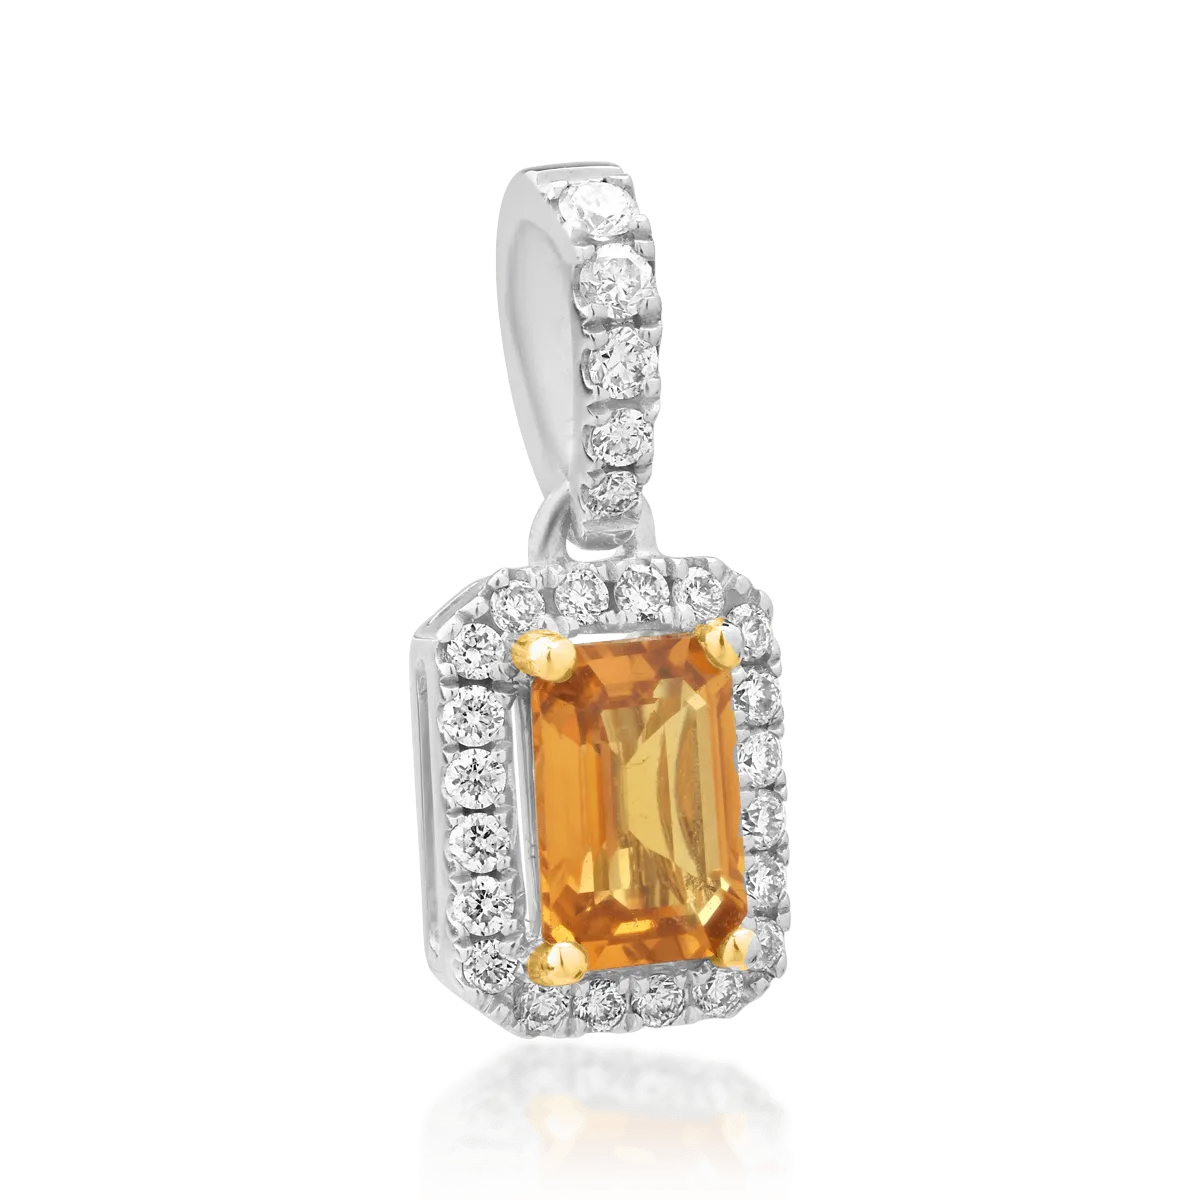 18K white gold pendant with 0.61ct yellow sapphire and 0.16ct diamonds